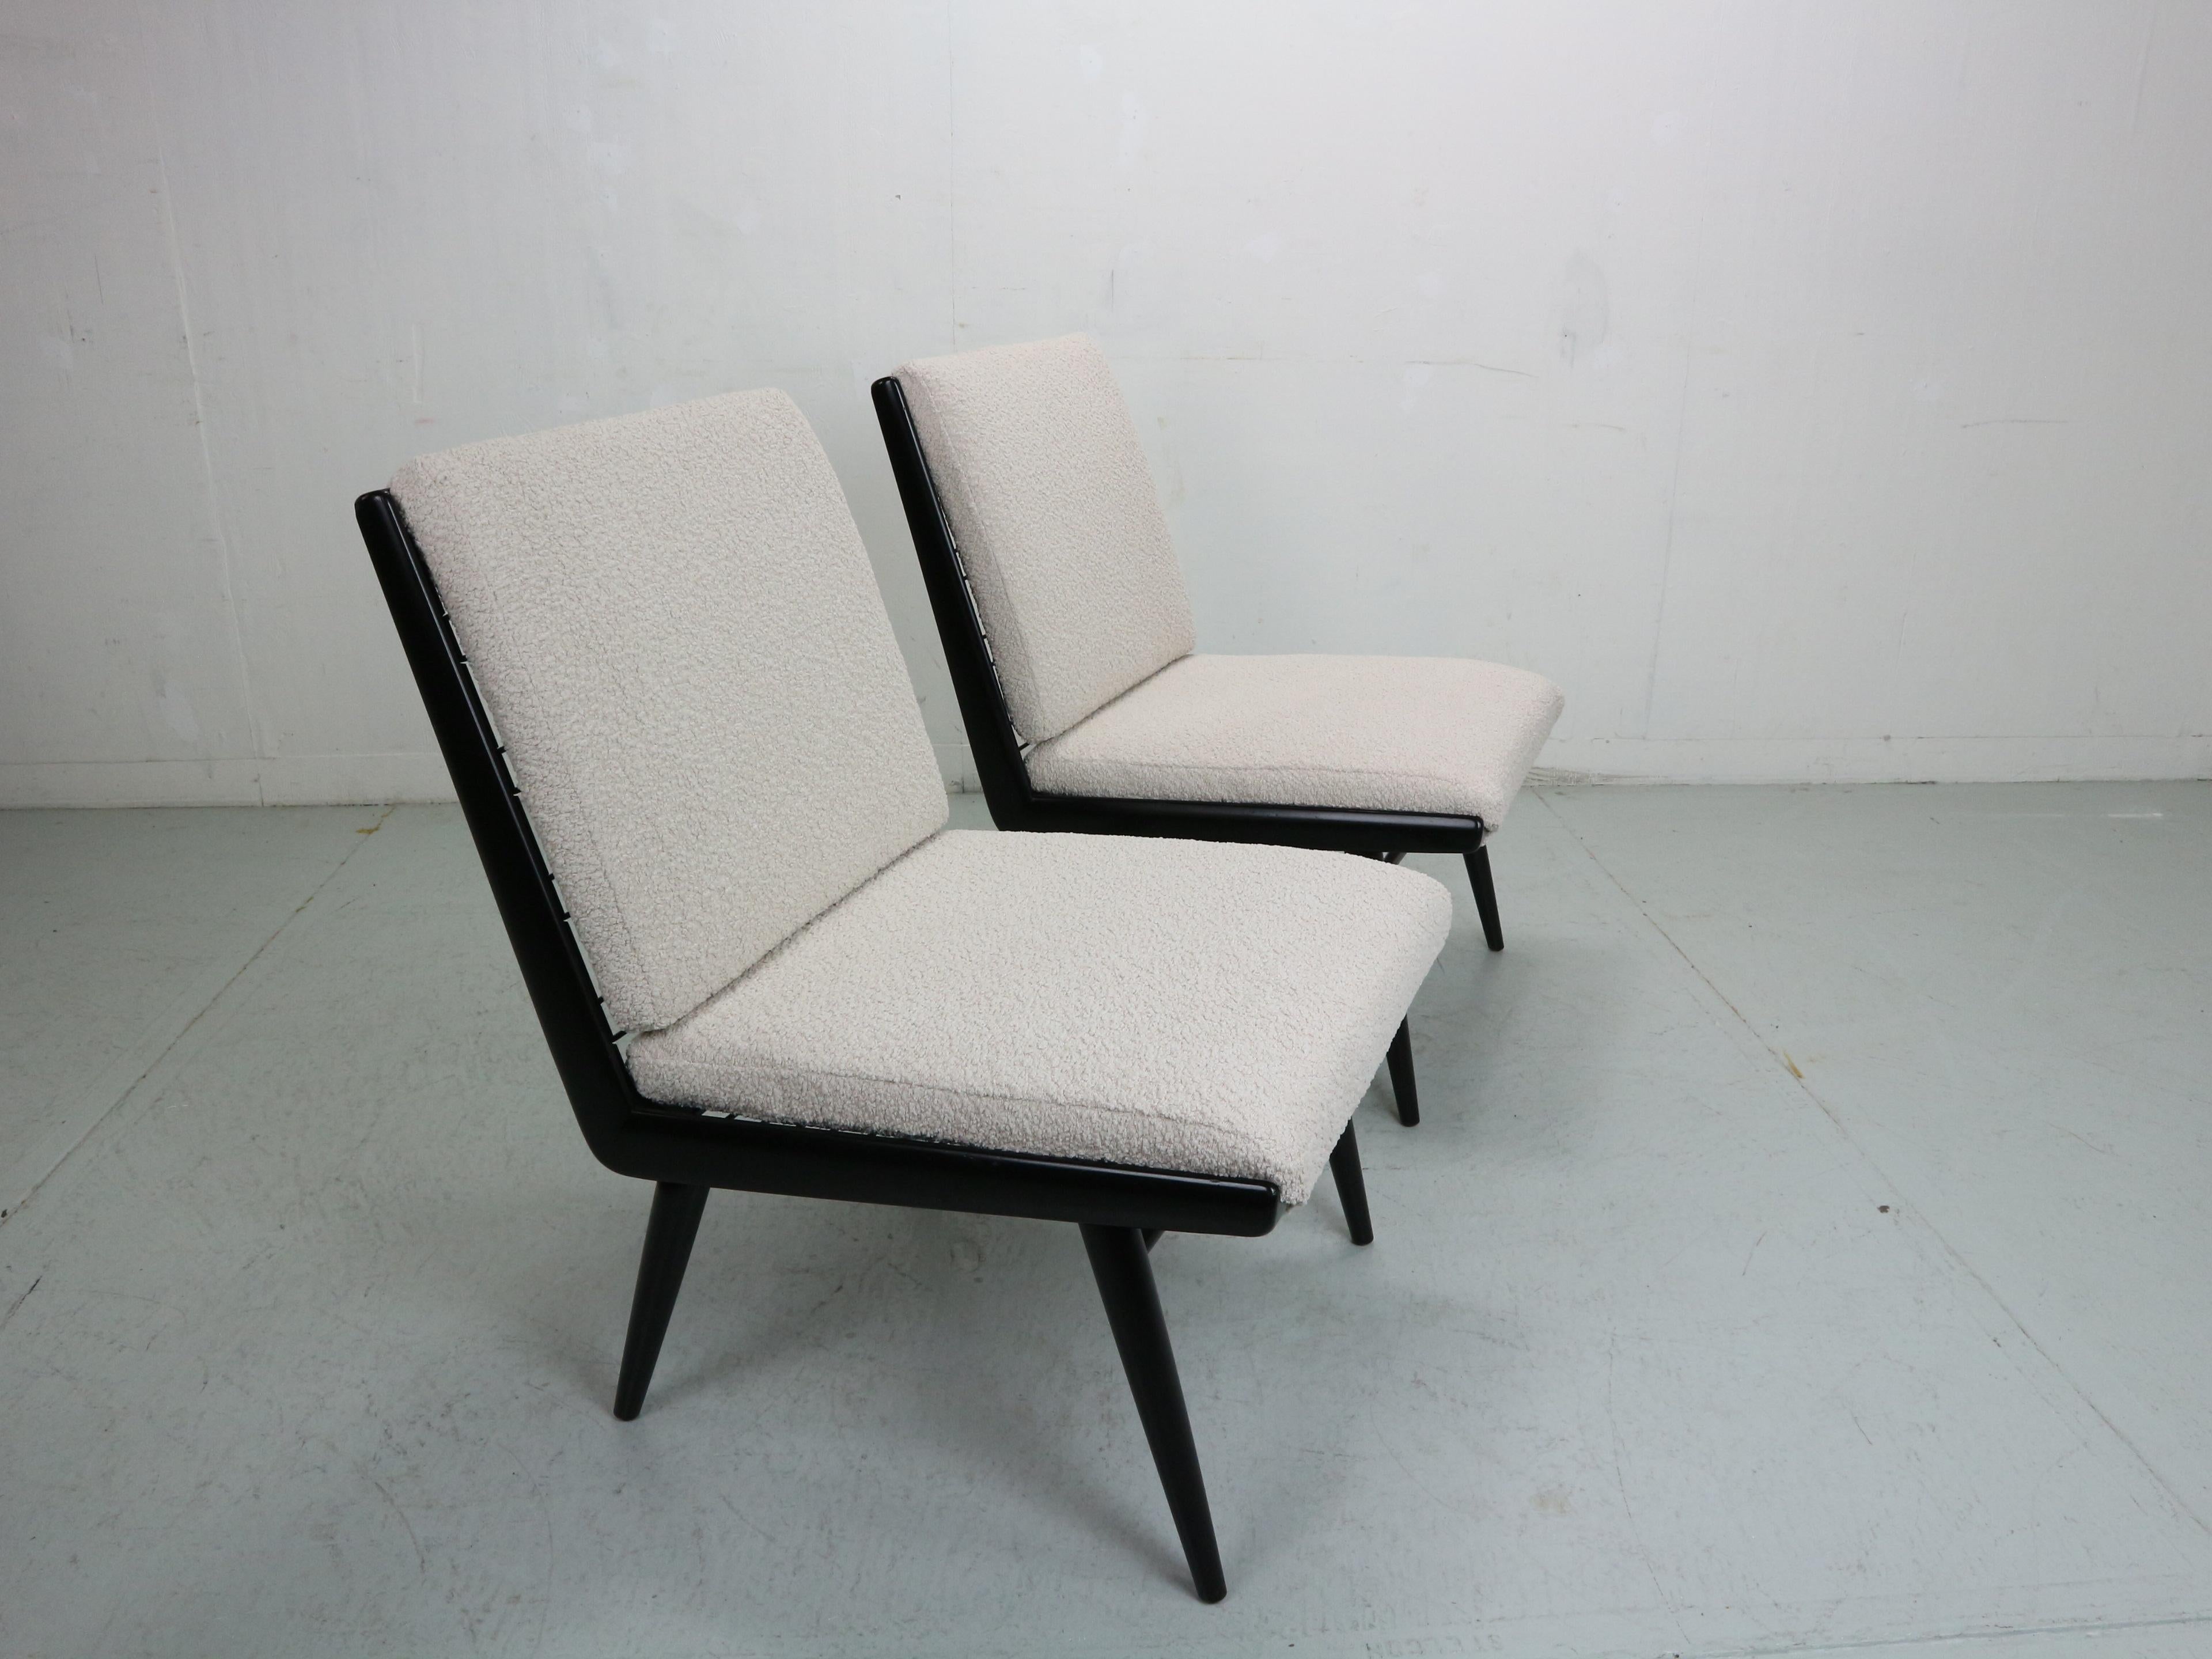 2x 'Boomerang' H. Mitzlaff, E. Schmidt for Soloform, bouclé lounge chairs, 1953 In Good Condition For Sale In The Hague, NL